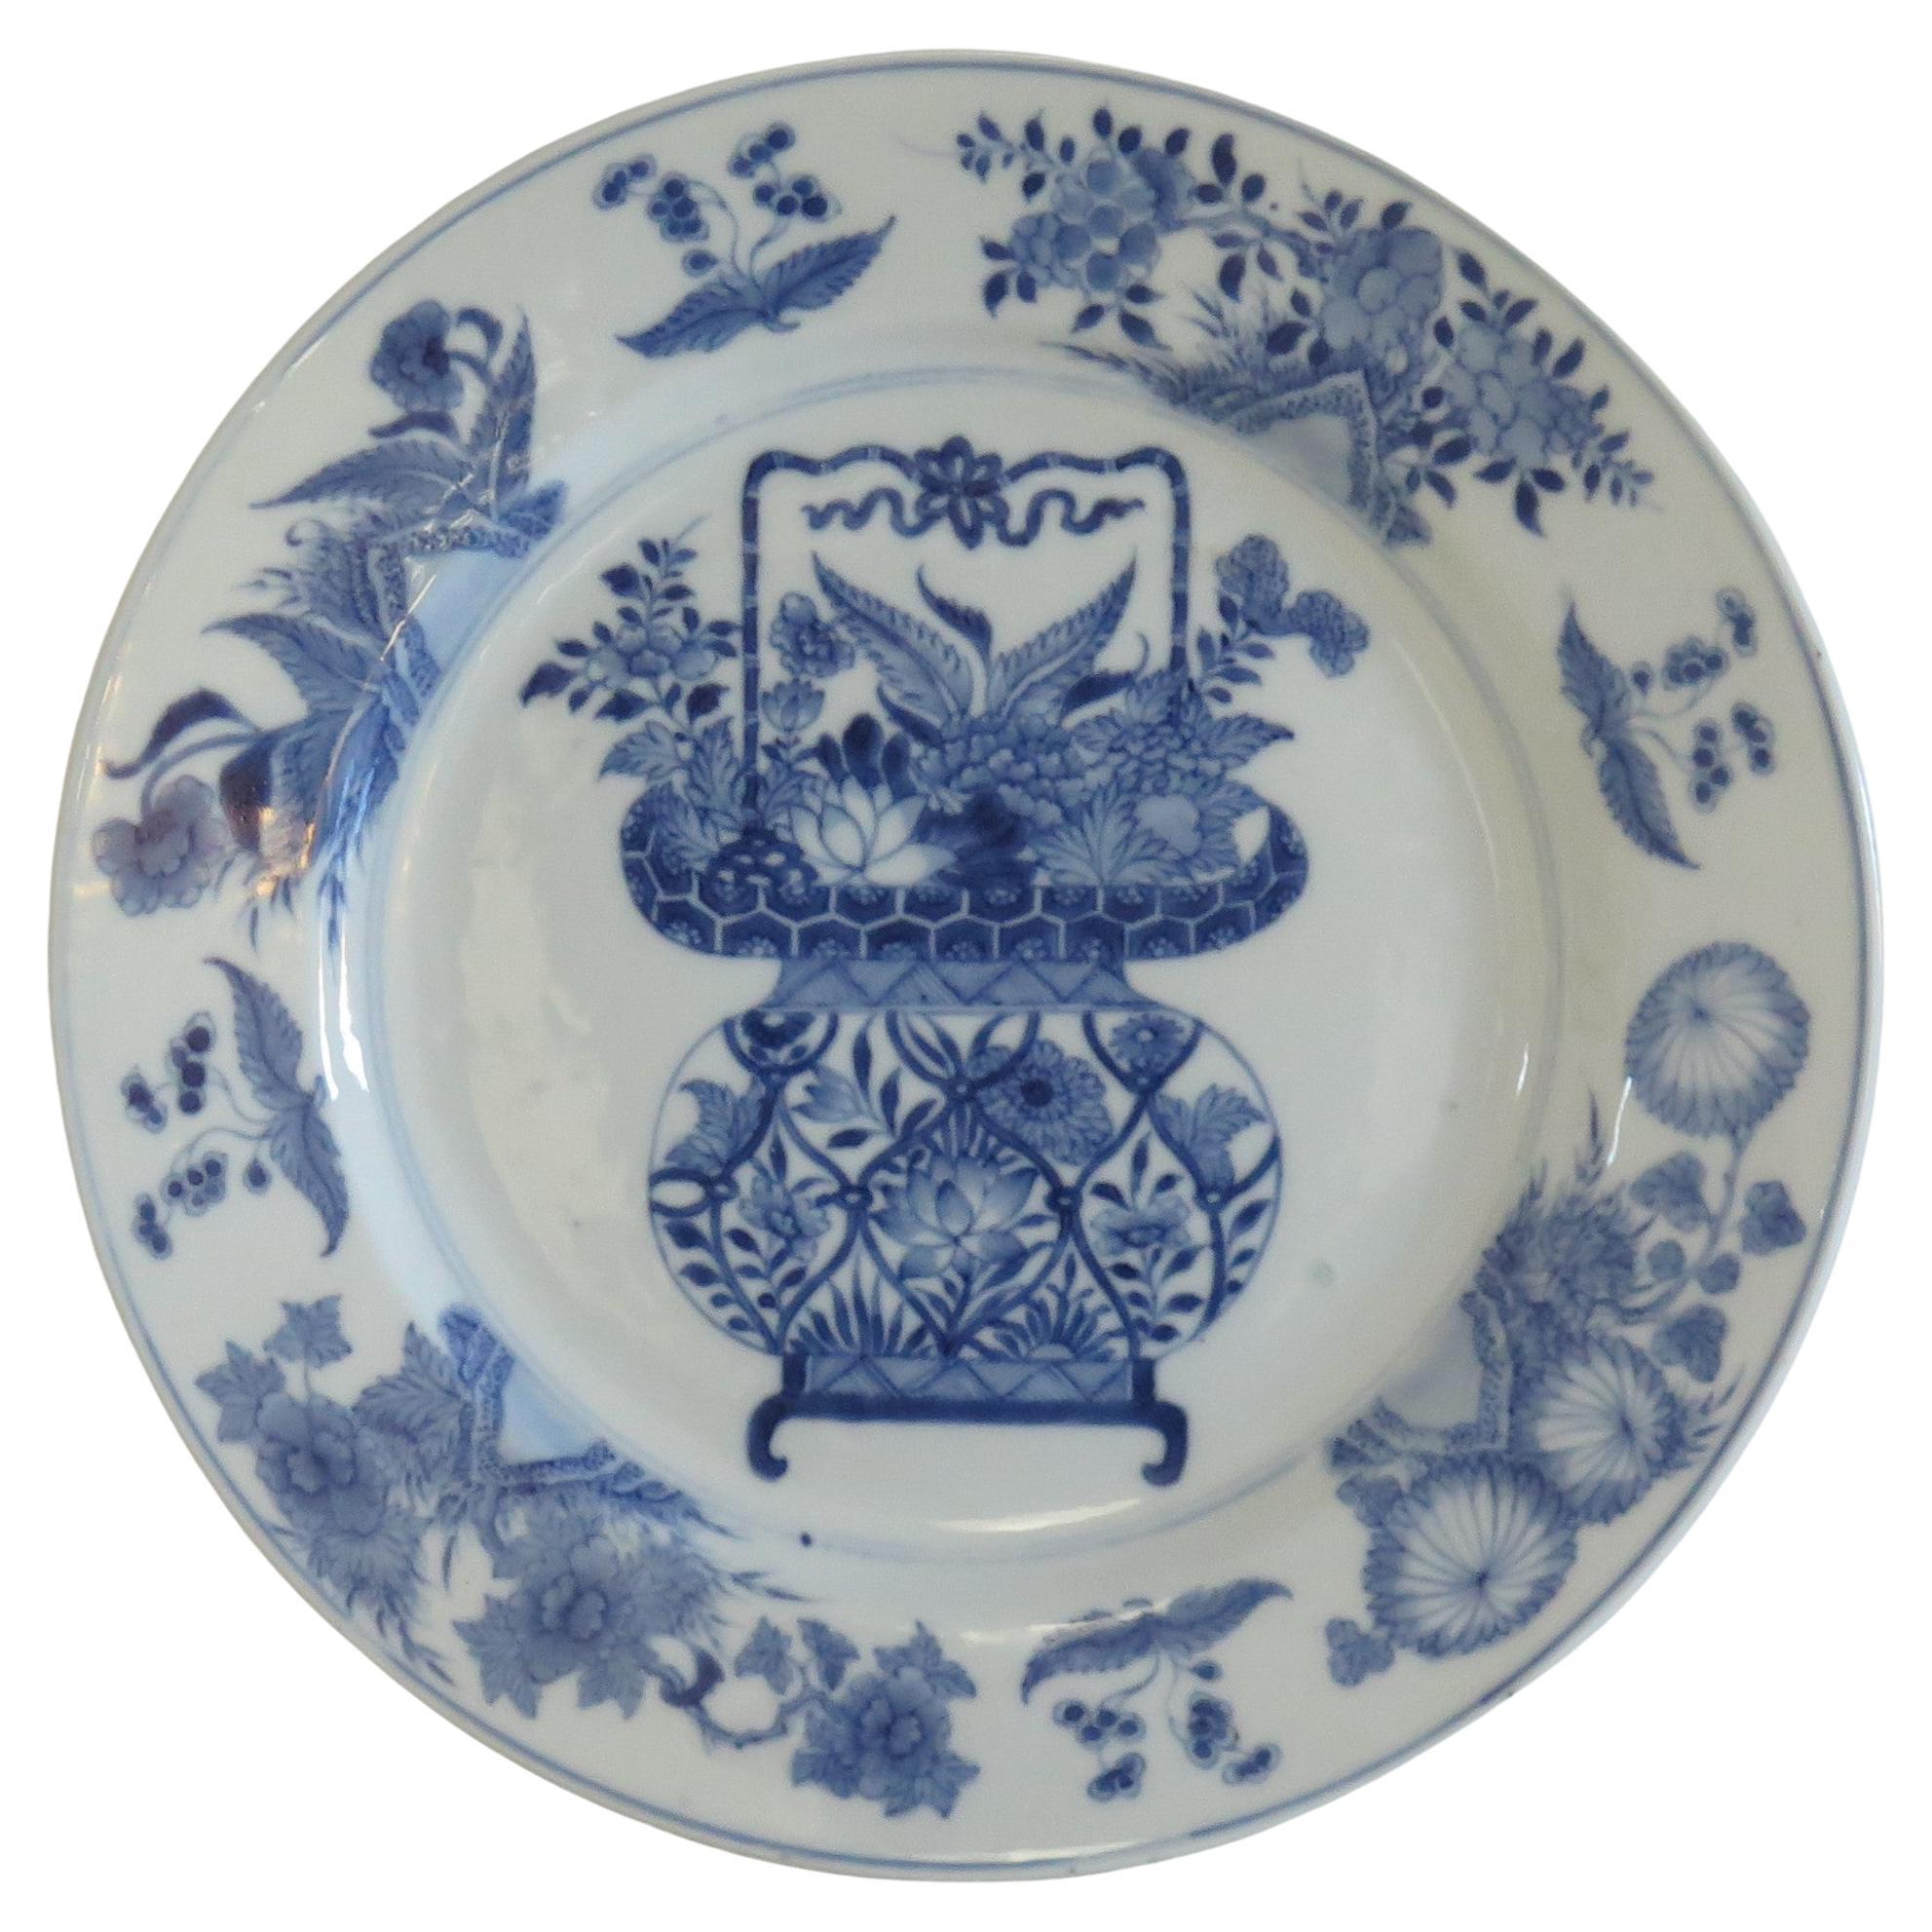 chinese antiques porcelain blue and white porcelain plate,ceramic dish,Qing dynasty Qianlong marked porcelain collection house decoration